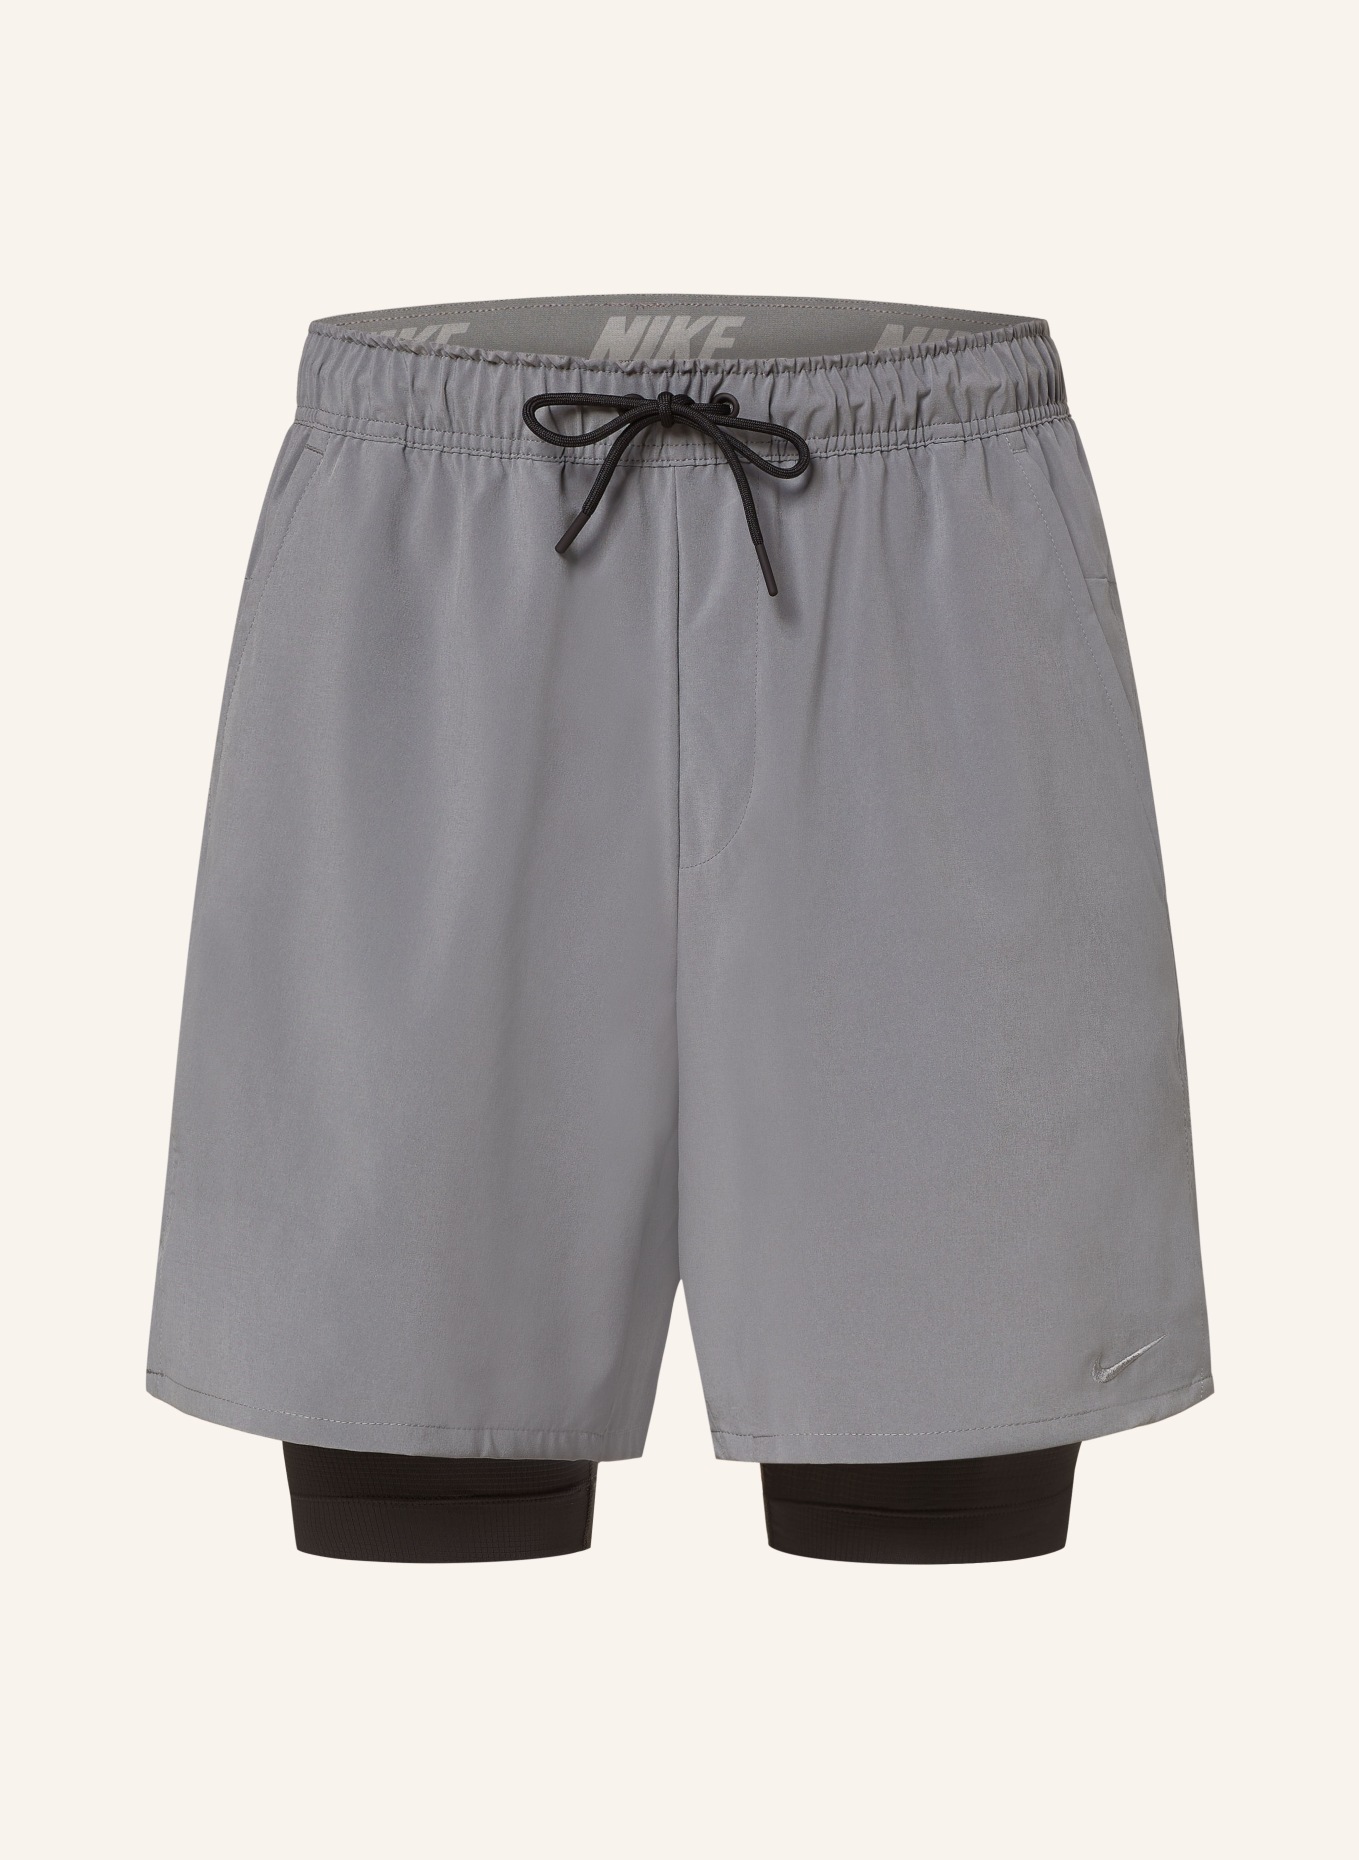 Nike 2-in-1 training shorts DRI-FIT UNLIMITED, Color: GRAY (Image 1)